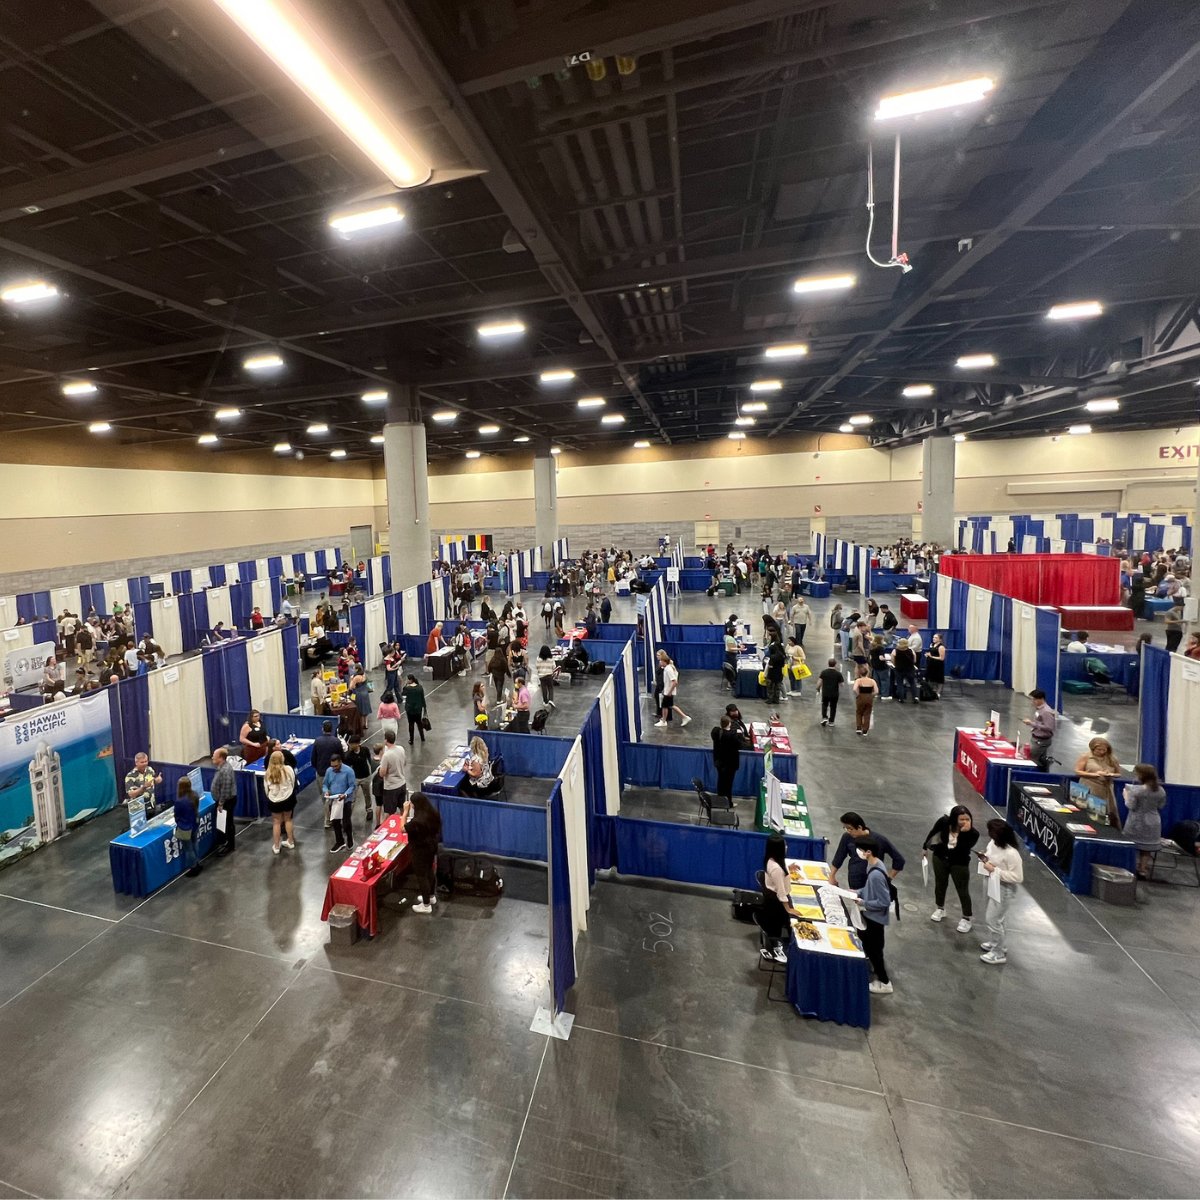 👏🏾👏🏻 Special thanks to the committee, volunteers, counselors, and exhibitors who joined us at the Greater Phoenix National College Fair on Sunday. You are appreciated! #collegefair #collegefairs